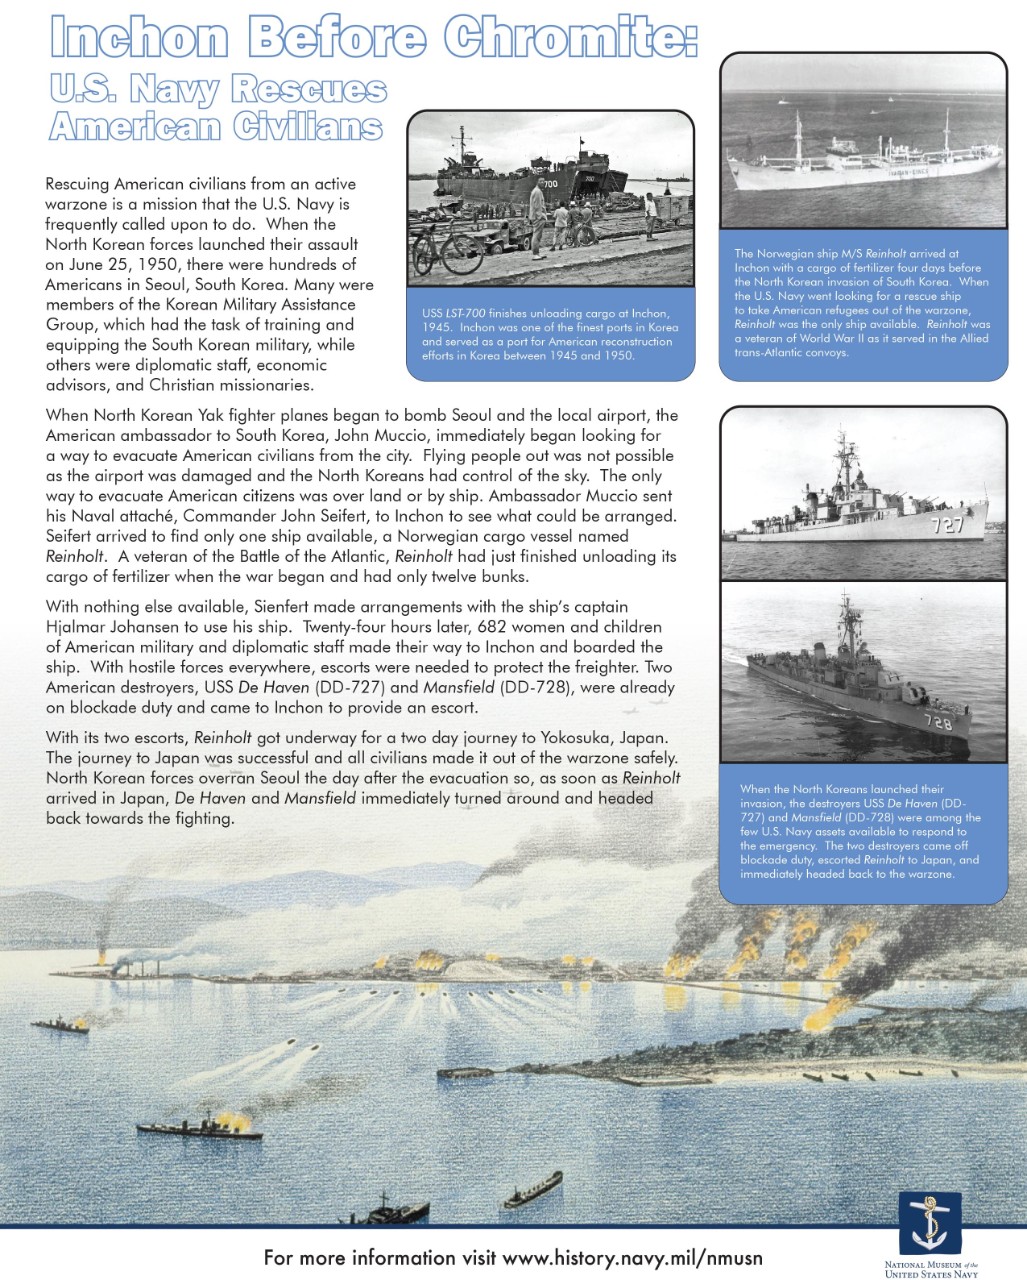 Inchon Before Chromite -- One Pager